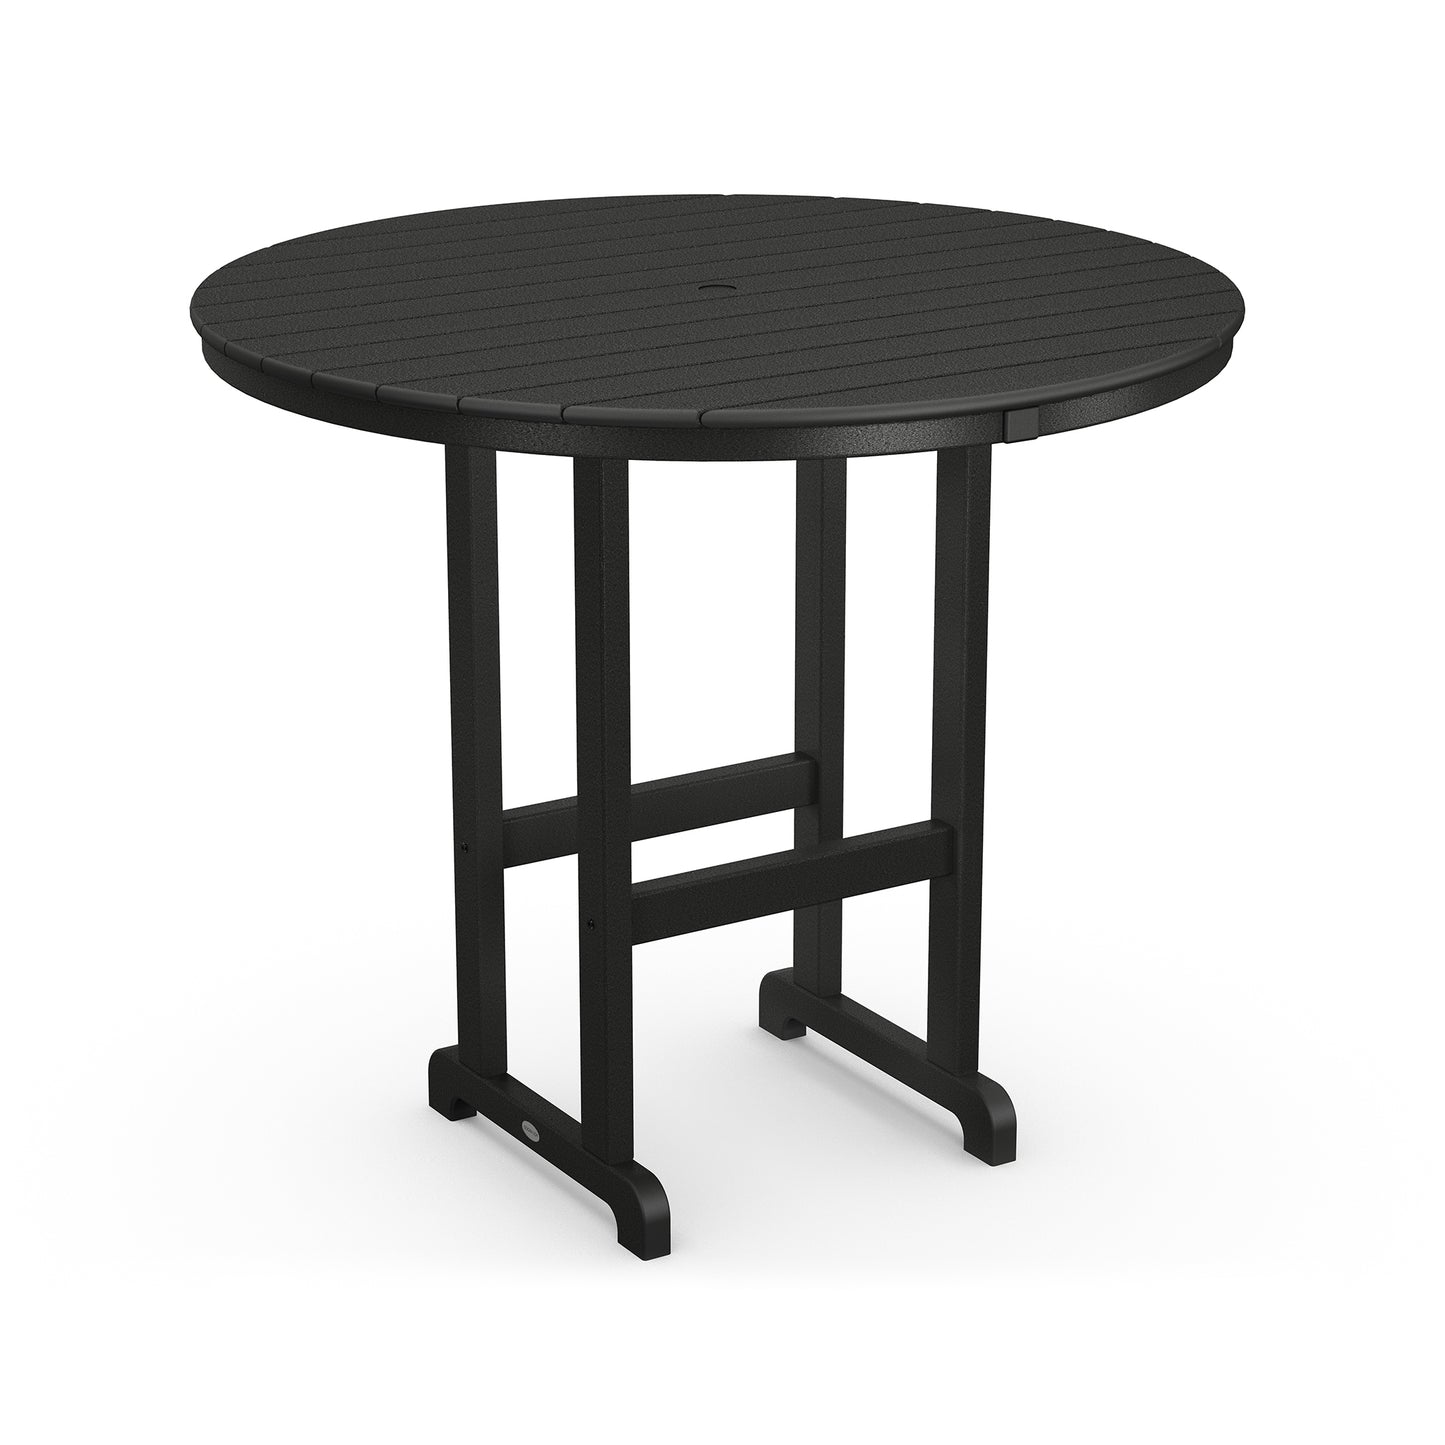 A round, black POLYWOOD® Outdoor 48" Round Bar Table with a ribbed surface and a four-legged base, each ending in a horizontal foot, isolated on a white background.